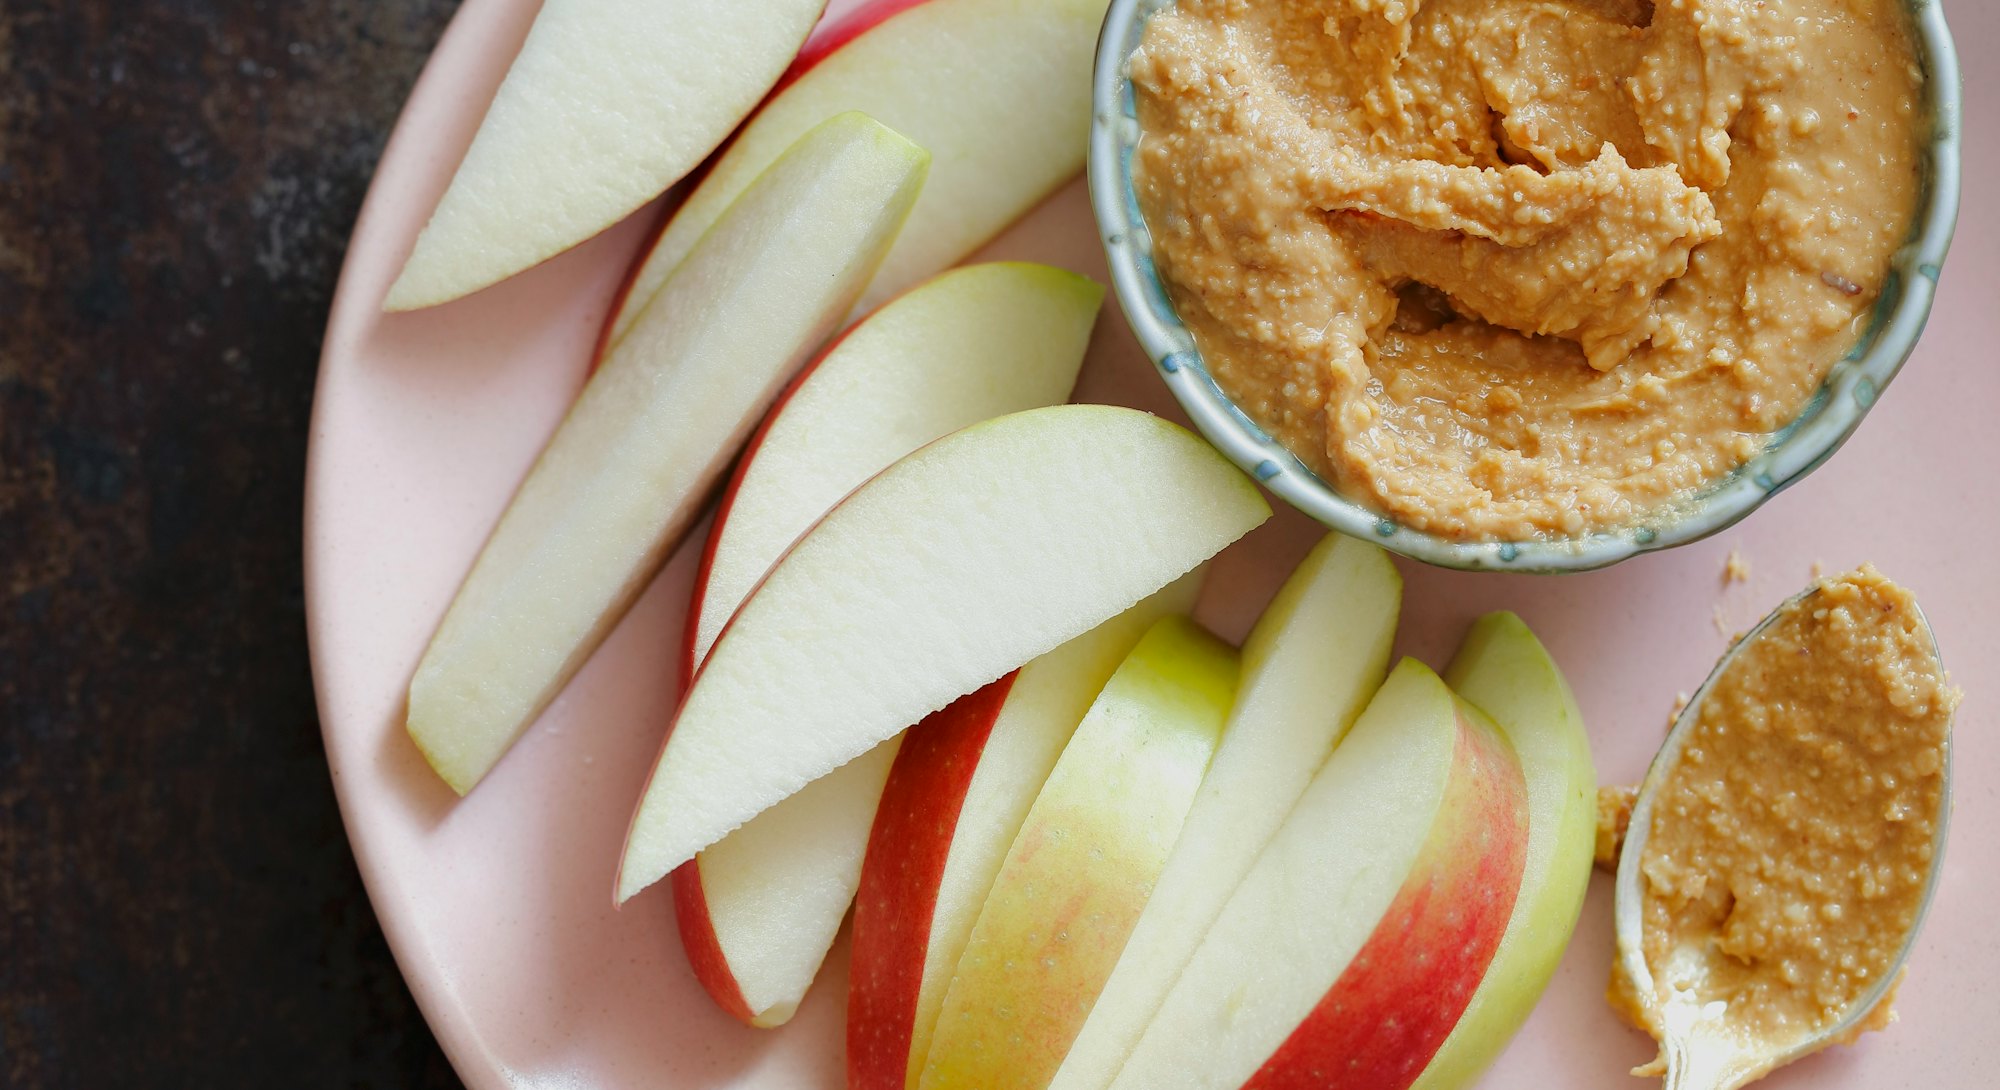 Apples and peanut butter are a classic after-school snack.